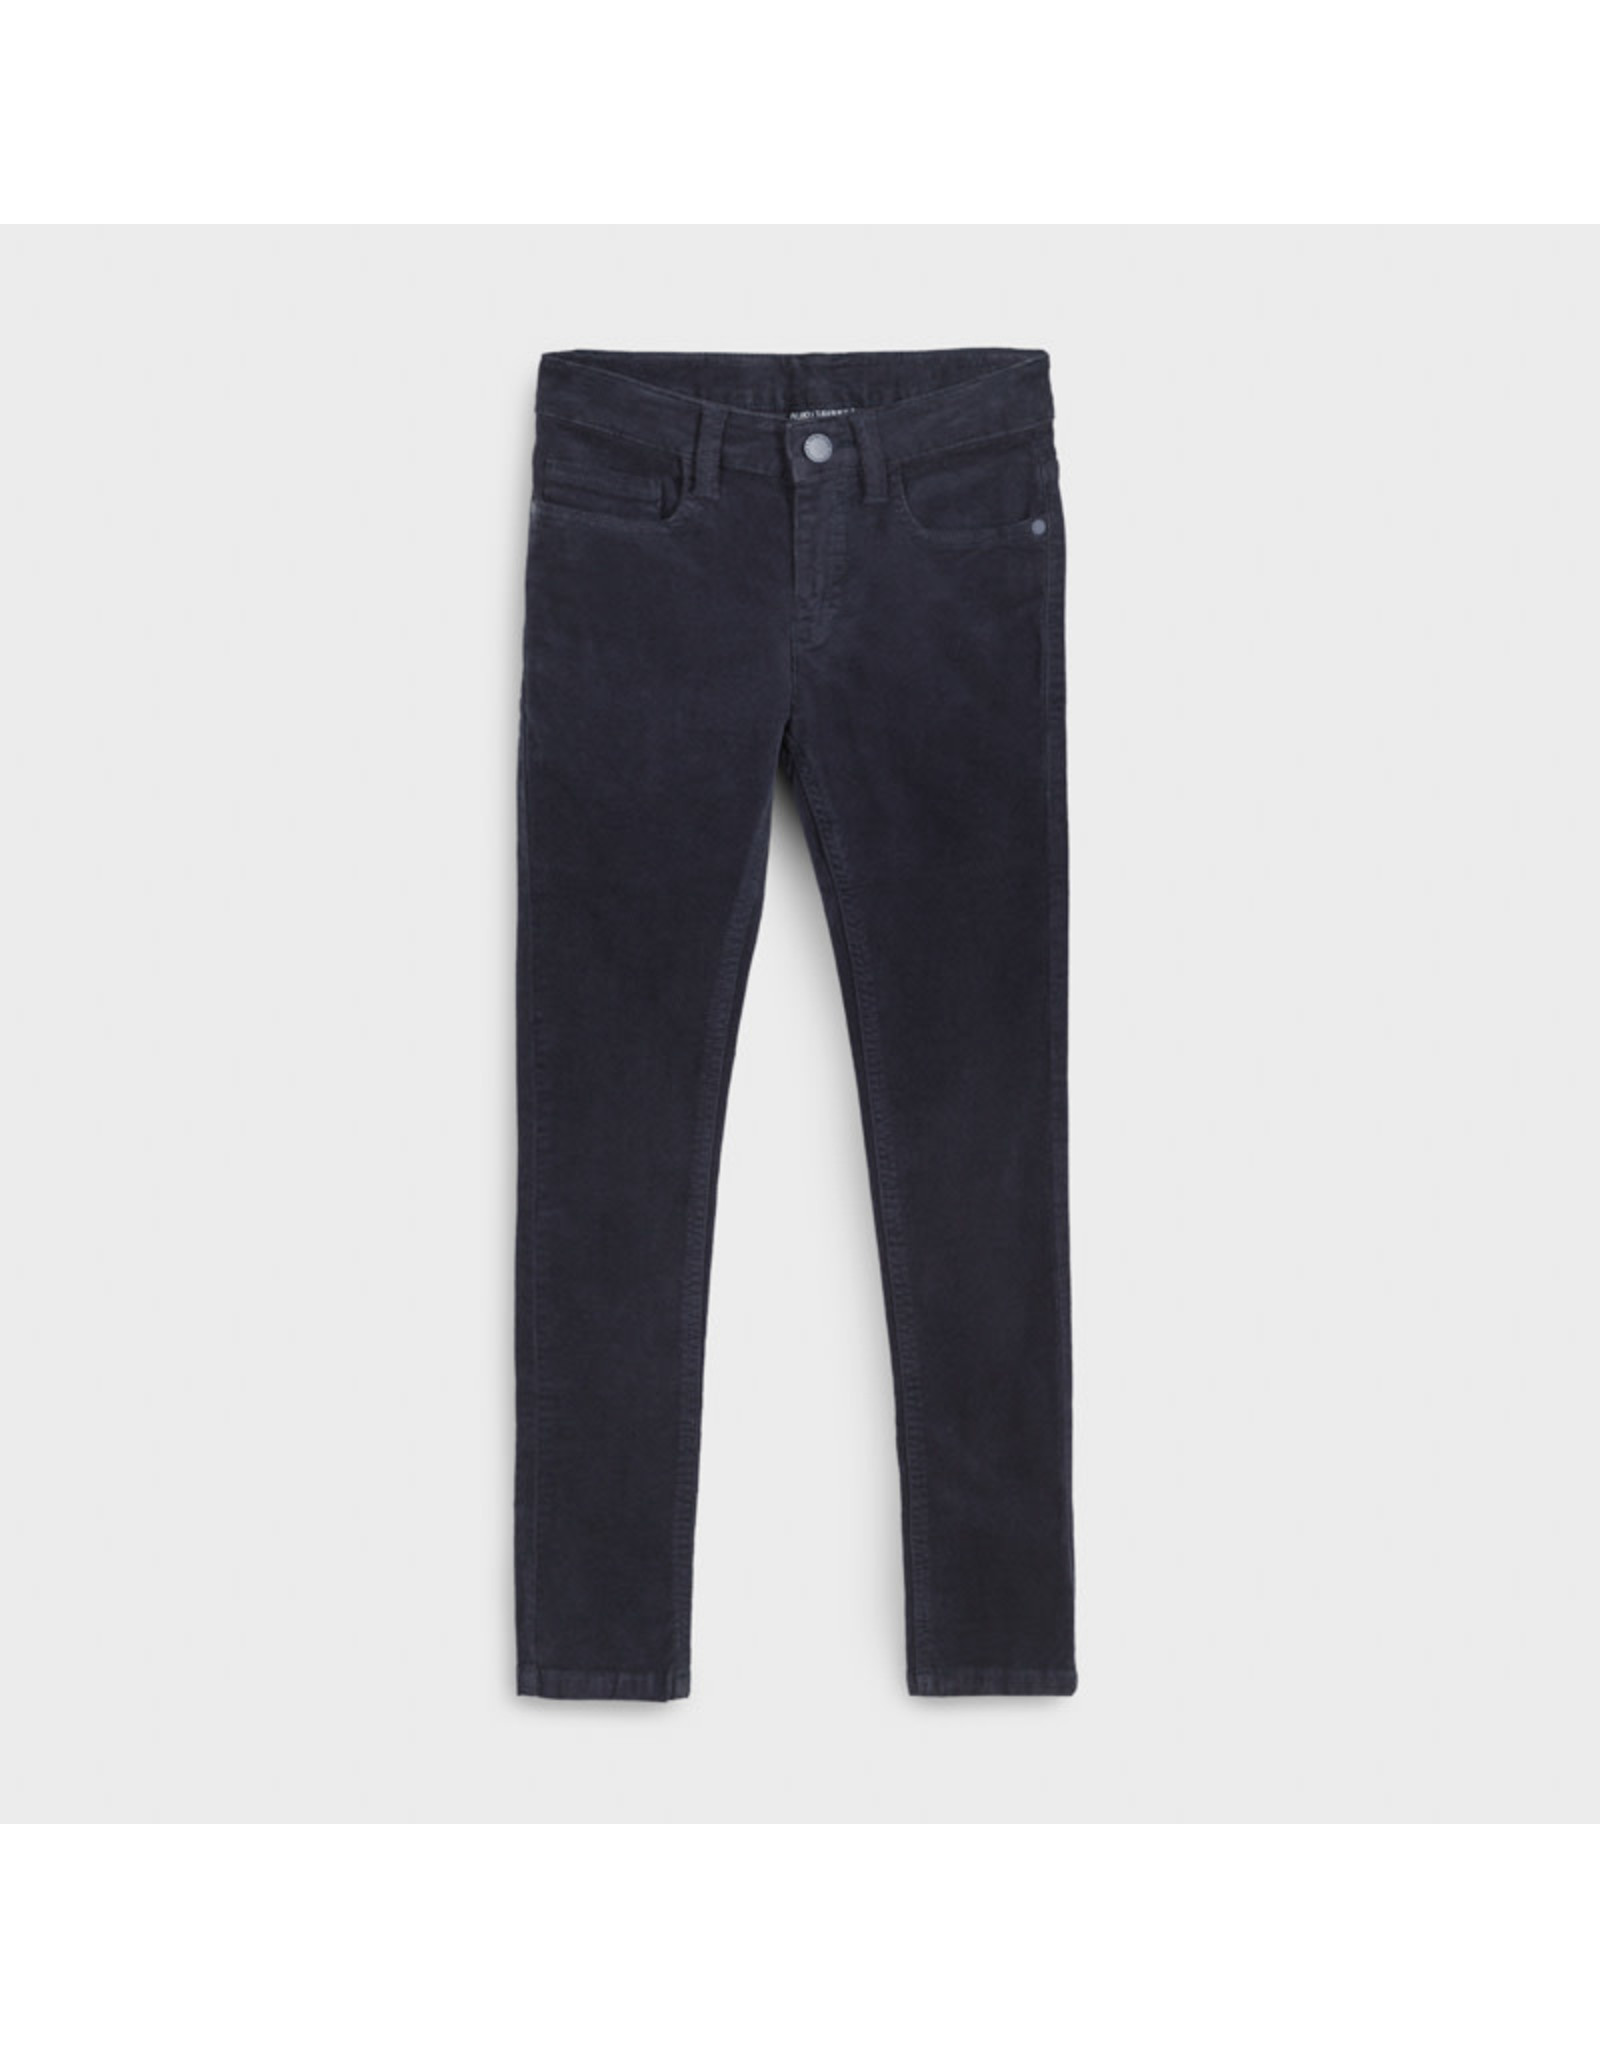 Mayoral Boys Slim Fit Cordoroy Trousers in Blue